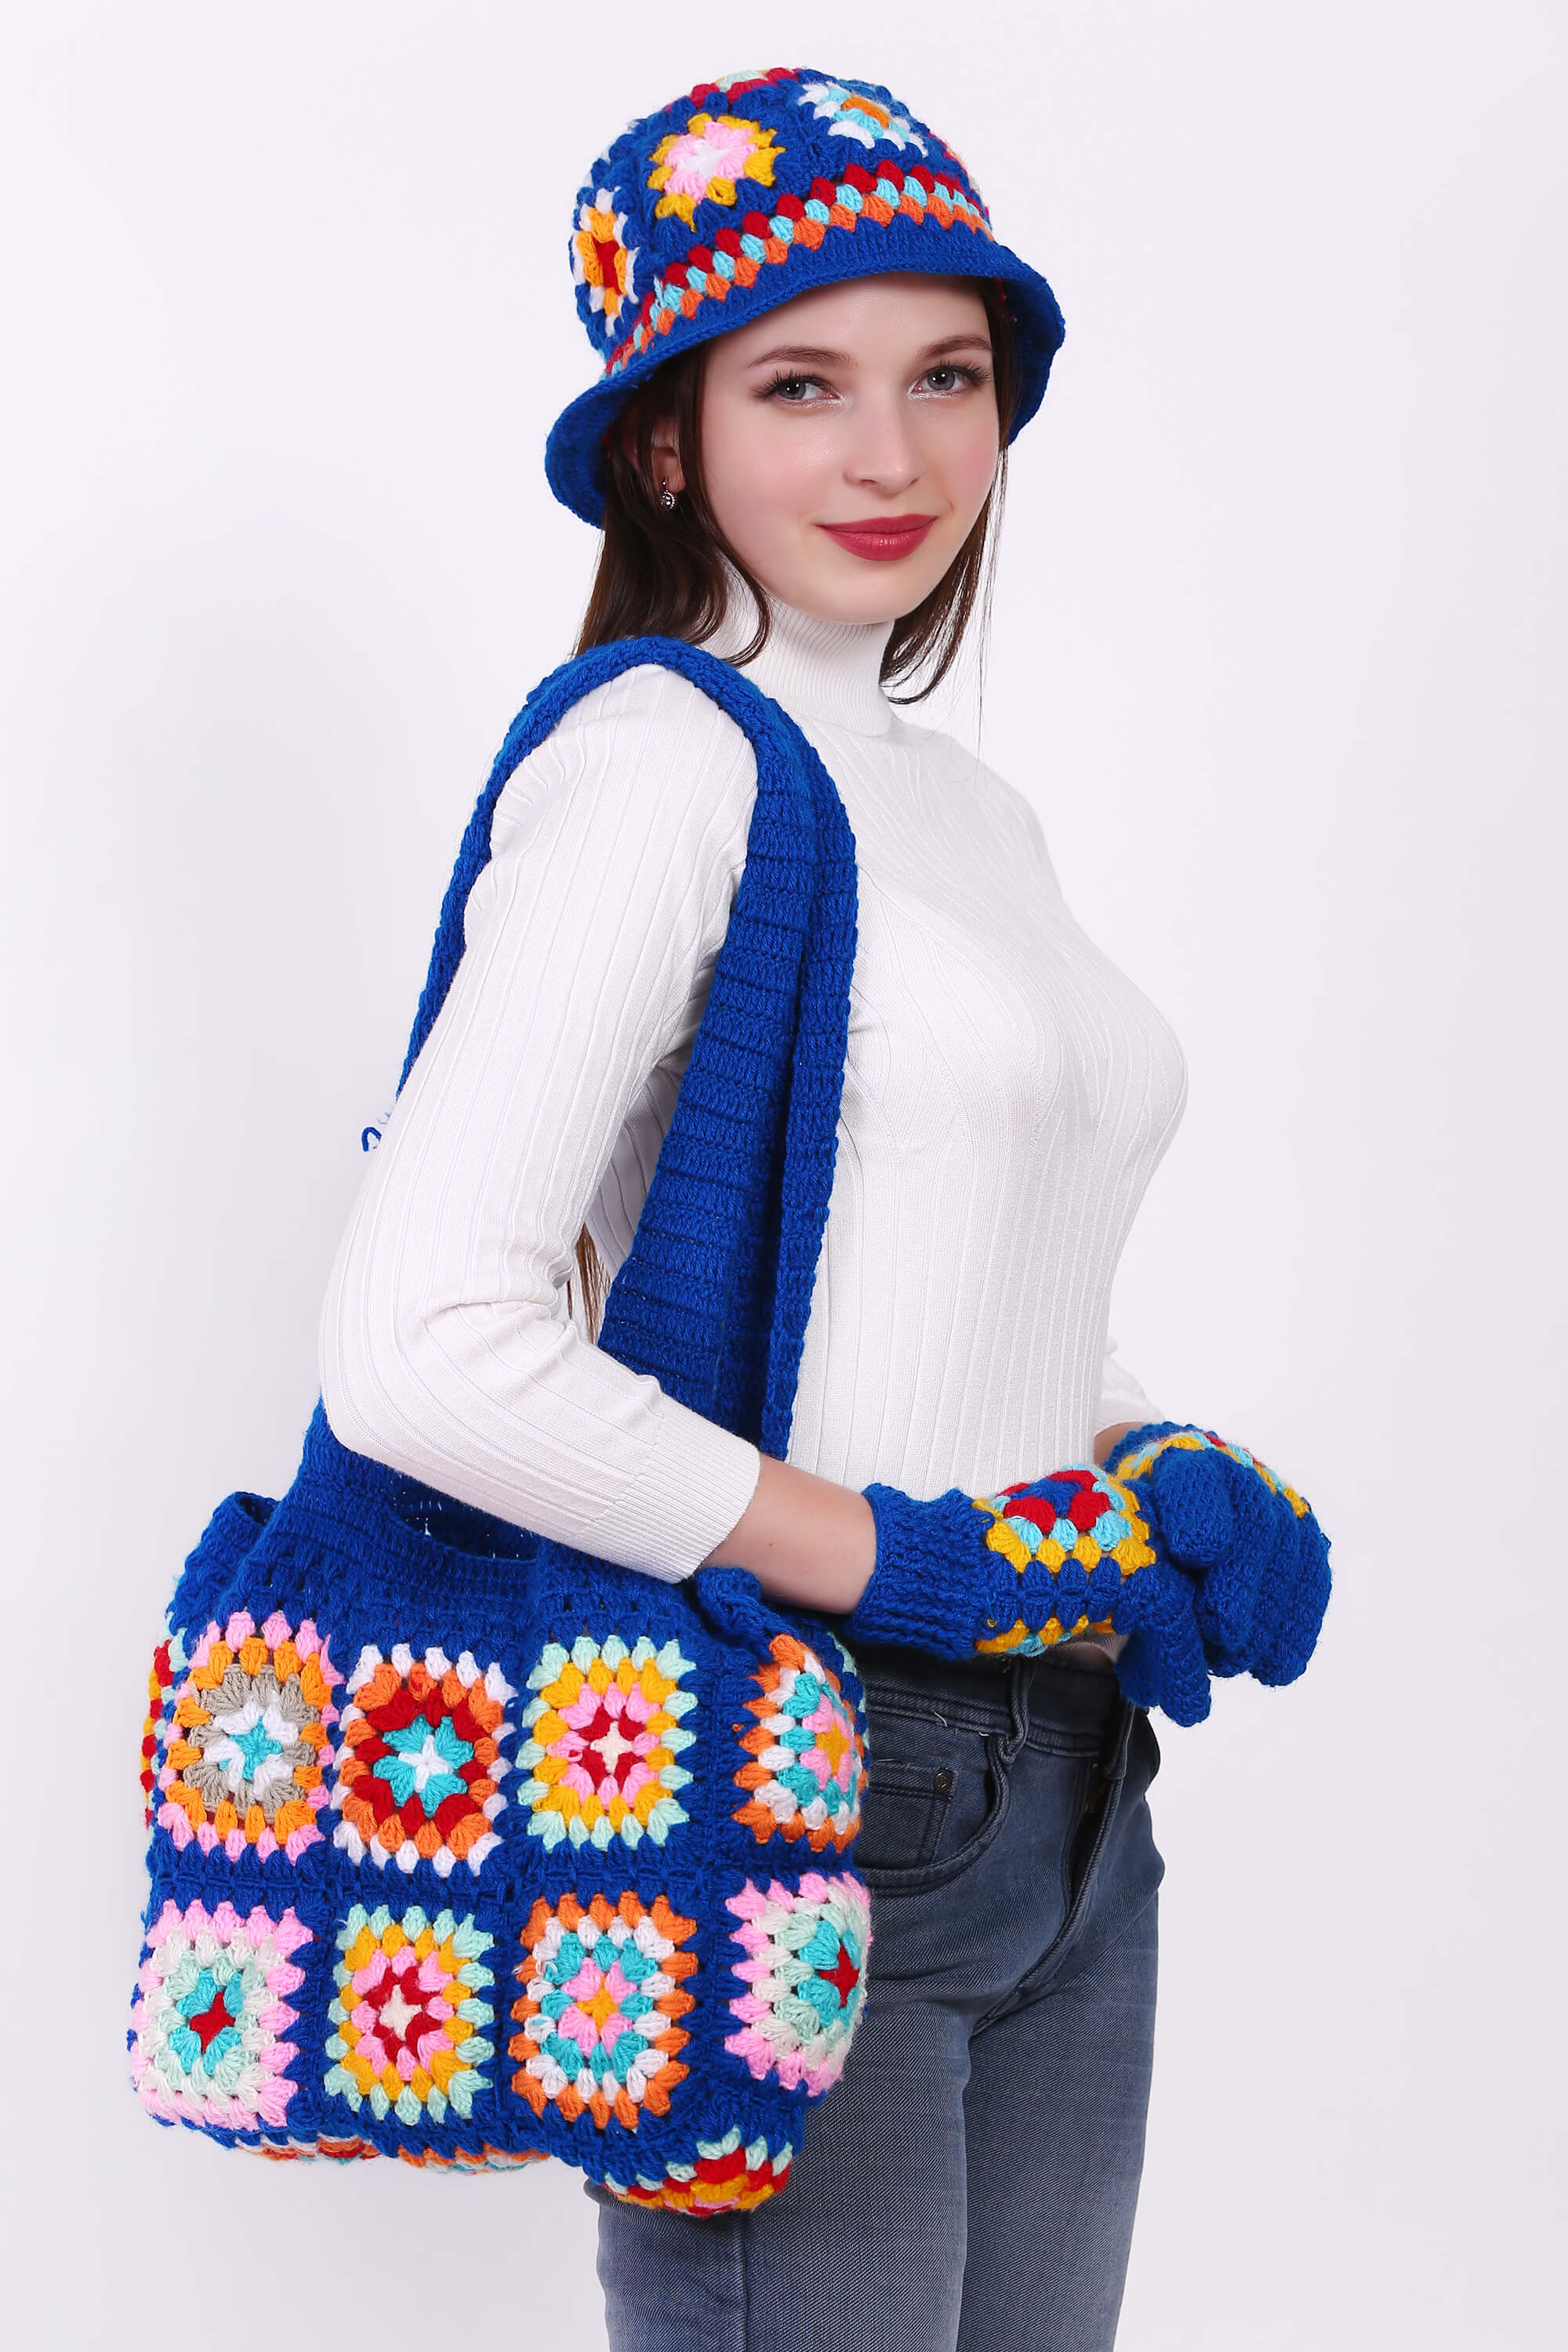 Complete Crochet Bag with Cap & Gloves